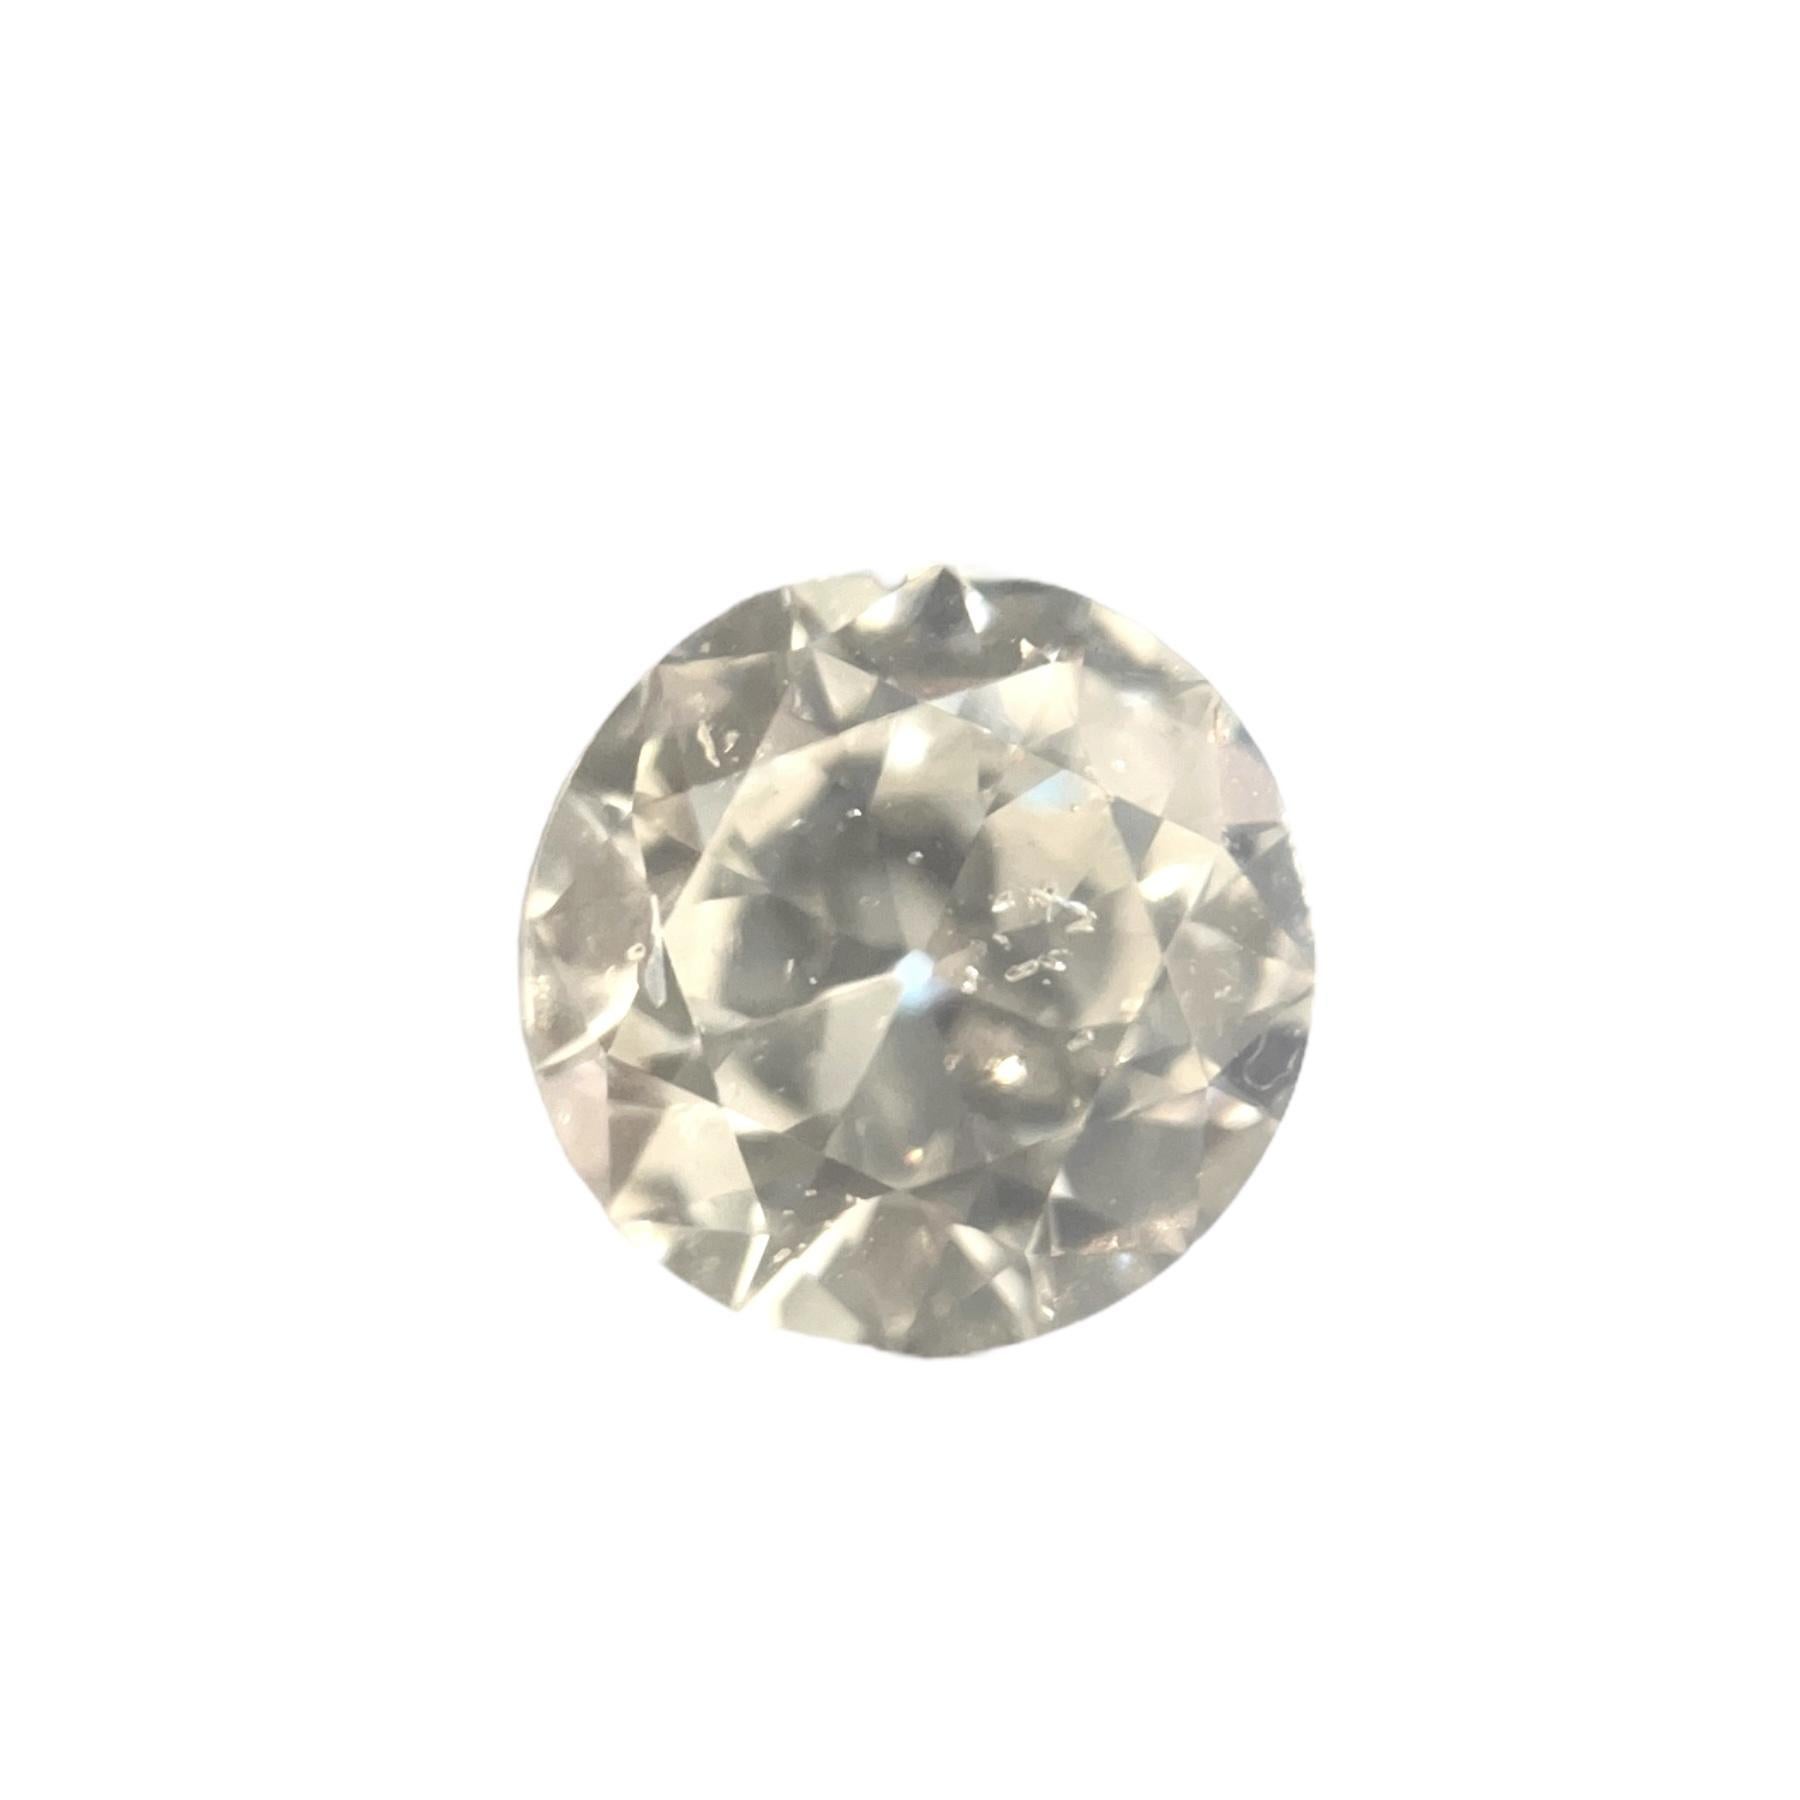 ITEM DESCRIPTION

ID #: NYC57590
Stone Shape: Round
Diamond Weight: 1.38 Carat
Clarity: SI2
Color: OE
Cut:	Excellent
Measurements: 7.33x 7.31 x 23.97 mm
Fluorescence: None
Appraisal Value: $5400.00
Our Price: $8100.00


A free online appraisal is